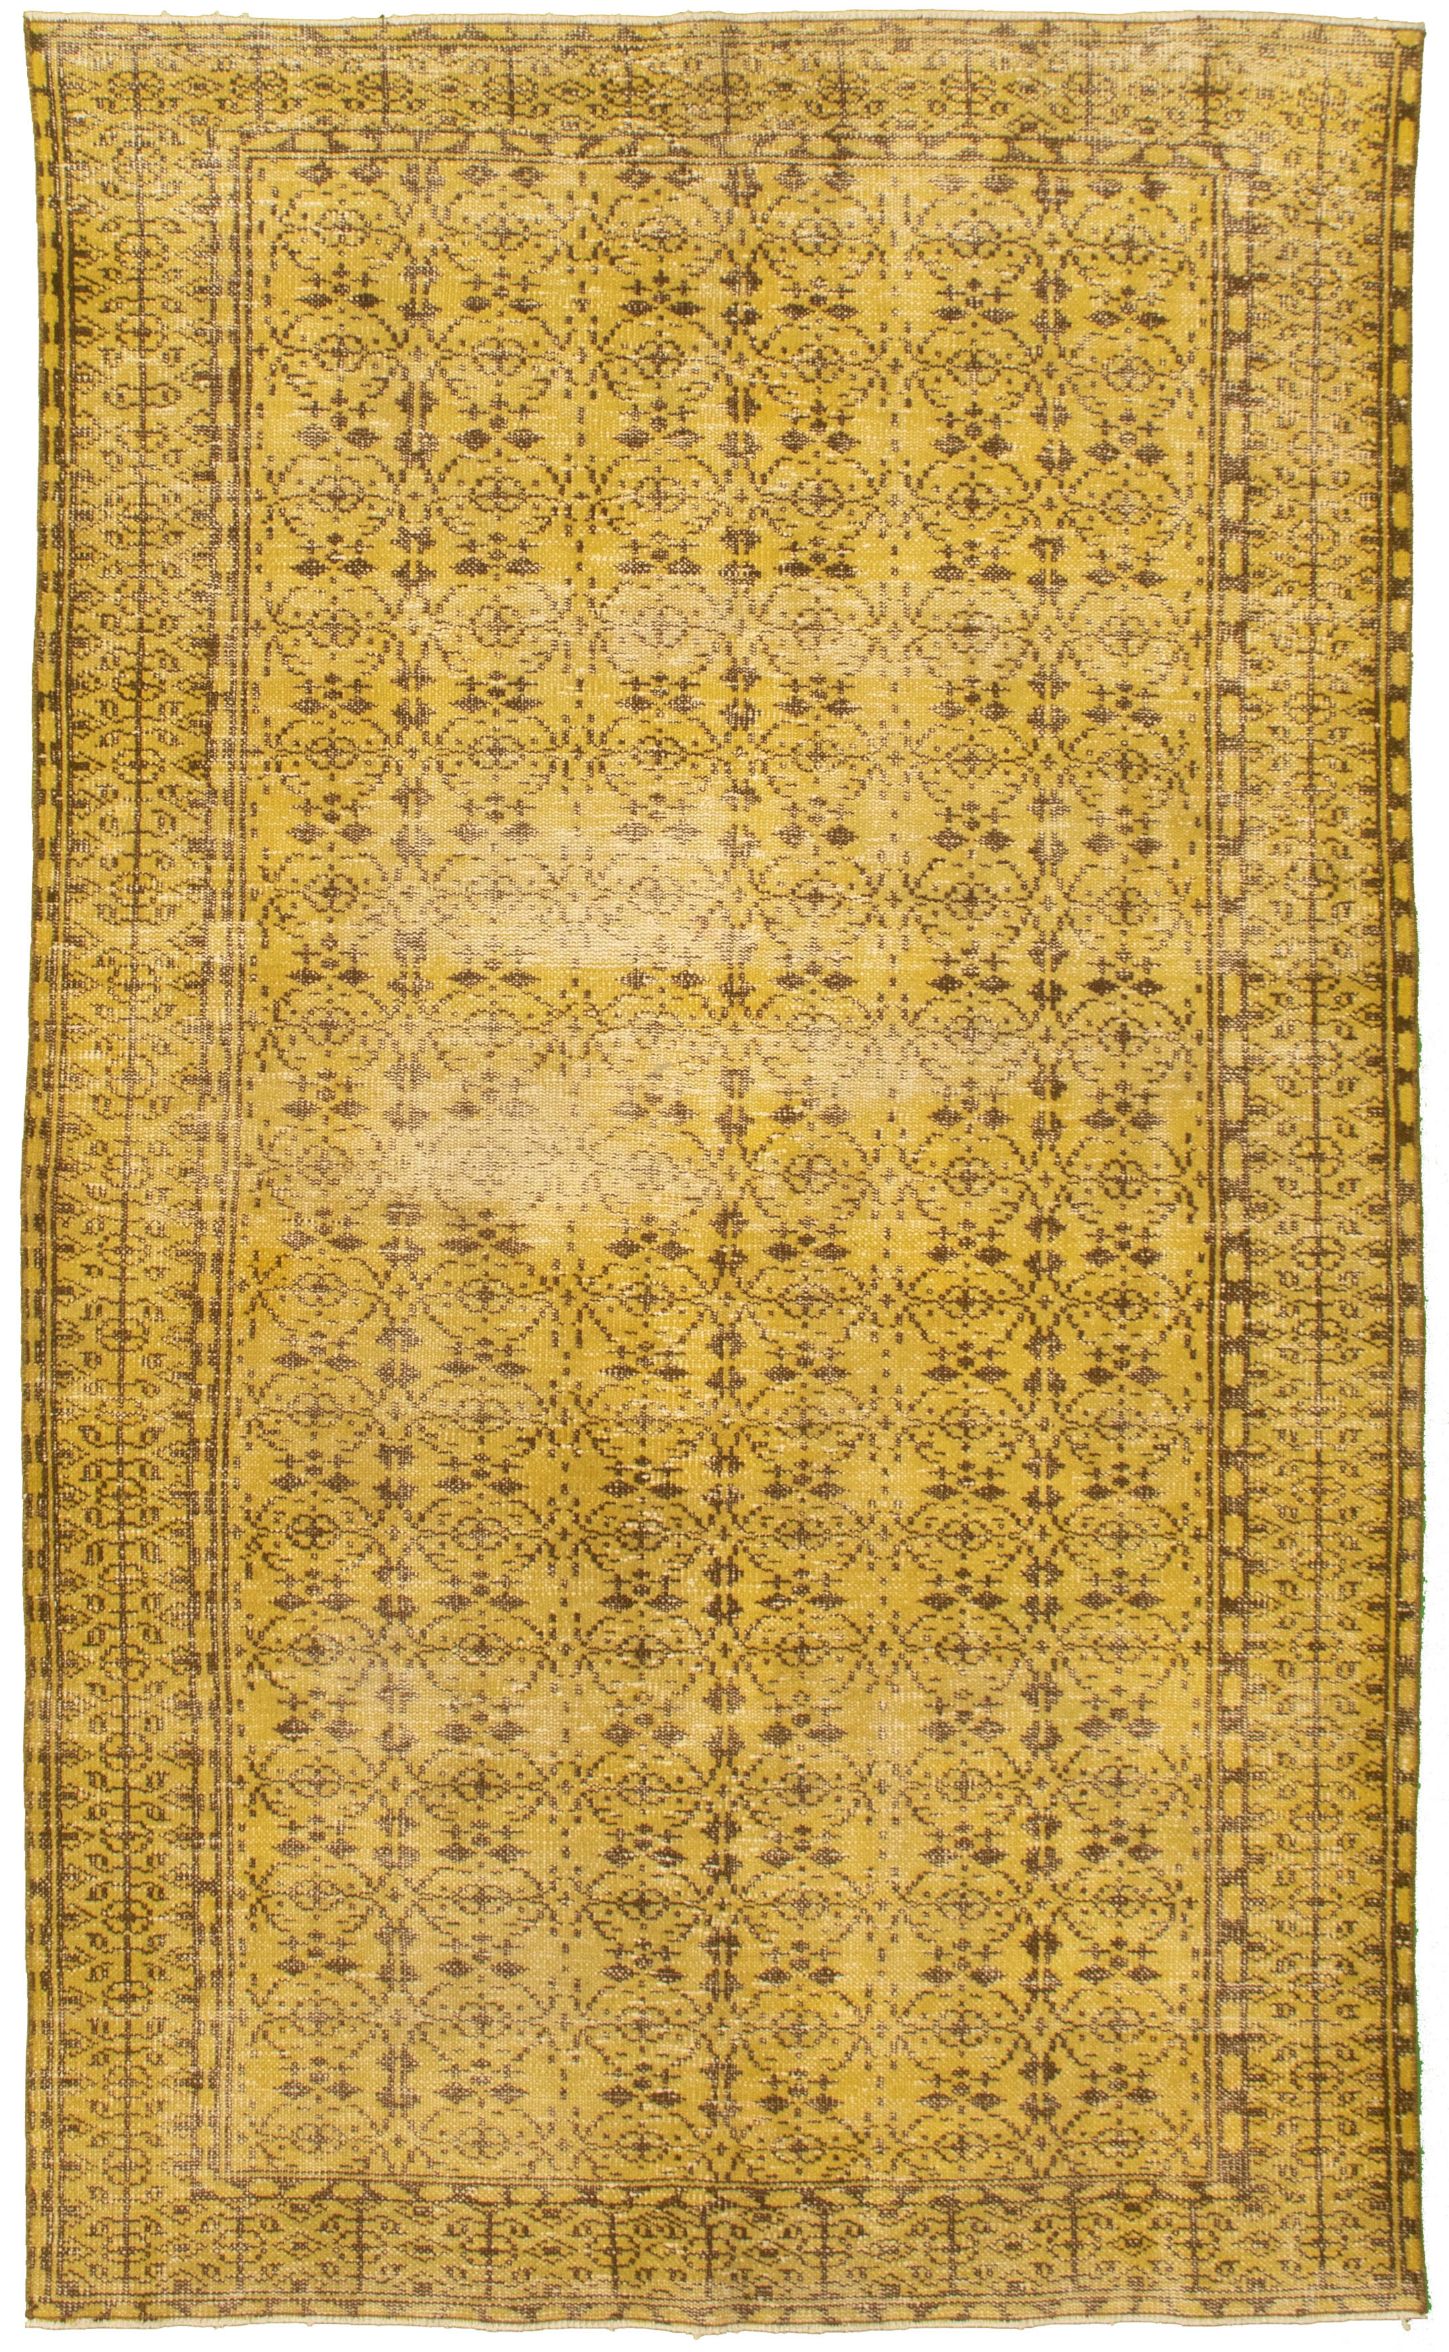 Hand-knotted Color Transition Dark Yellow Wool Rug 5'1" x 8'10" Size: 5'1" x 8'10"  